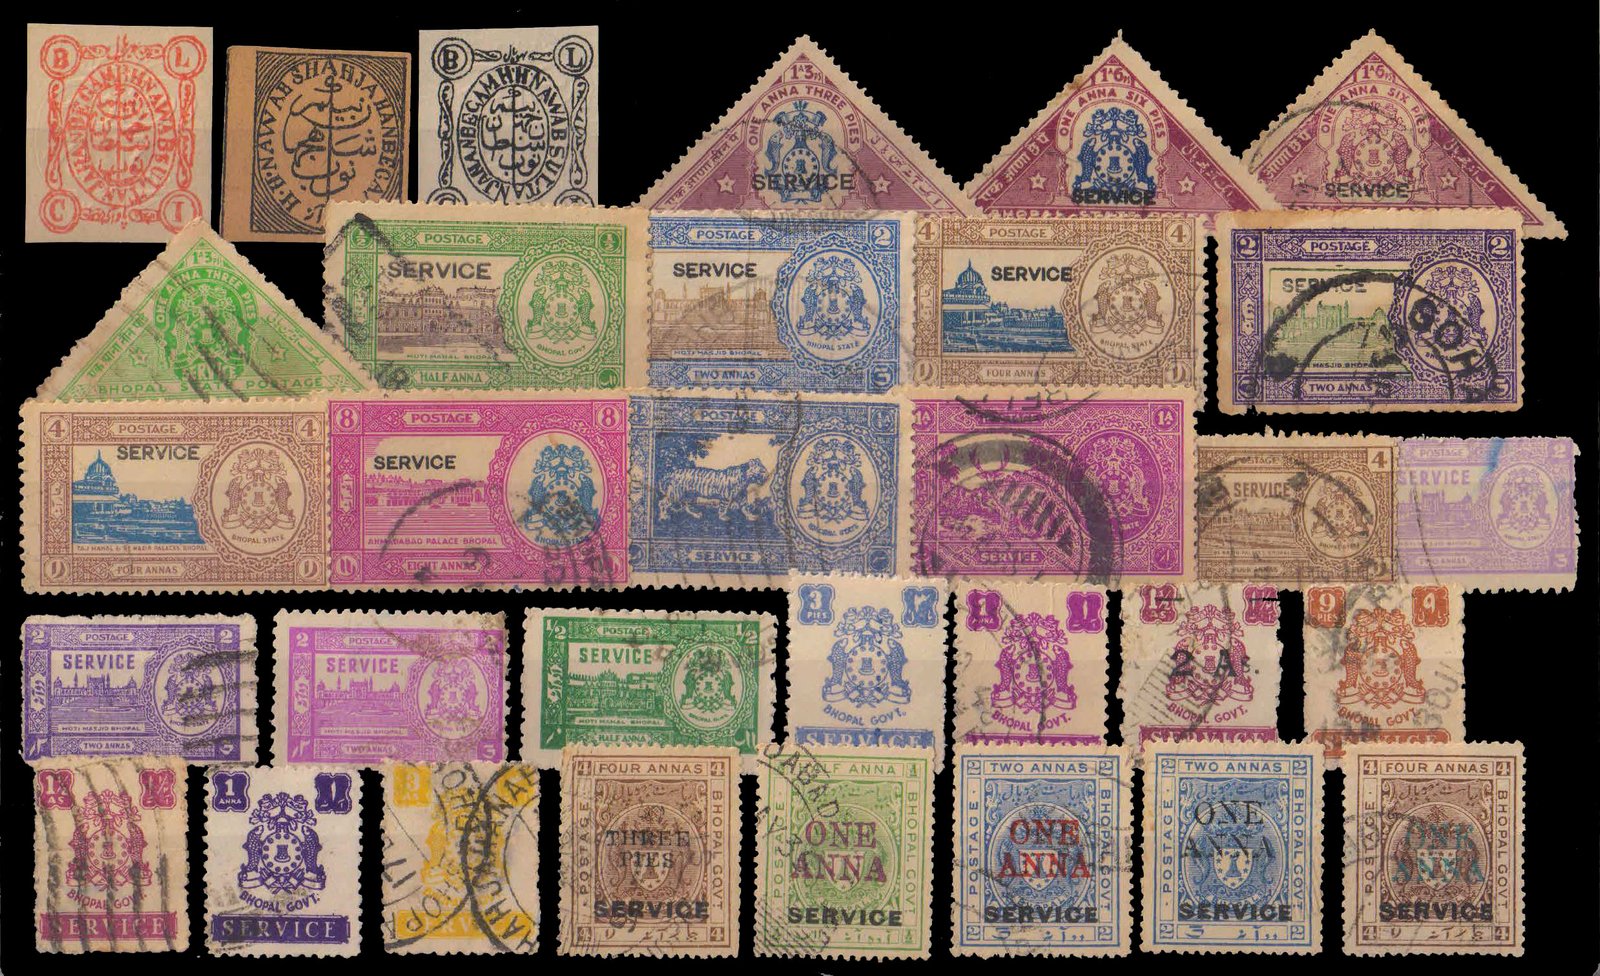 BHOPAL STATE-50 All Different Old Stamps-Pre 1950 Period-Mostly Used-Perf & Imperf